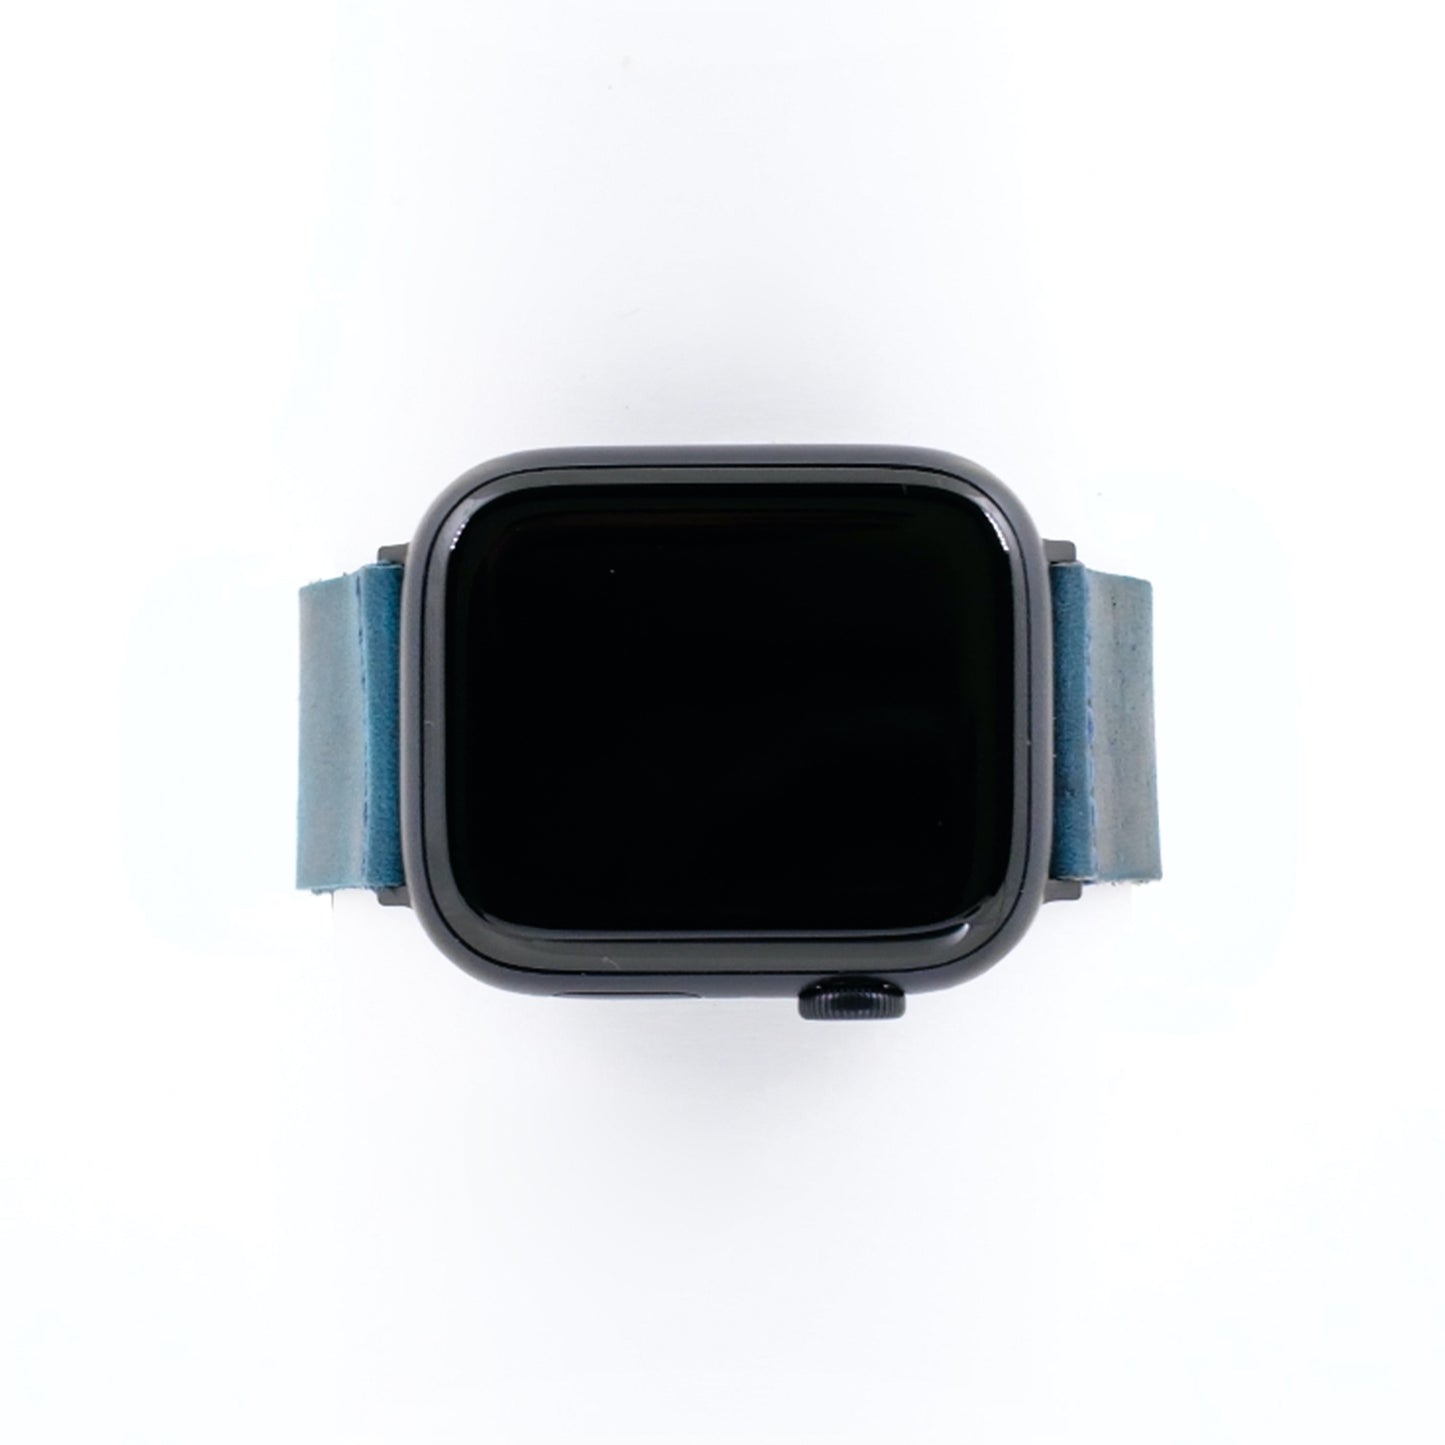 BUCKLE BLUE 22 mm